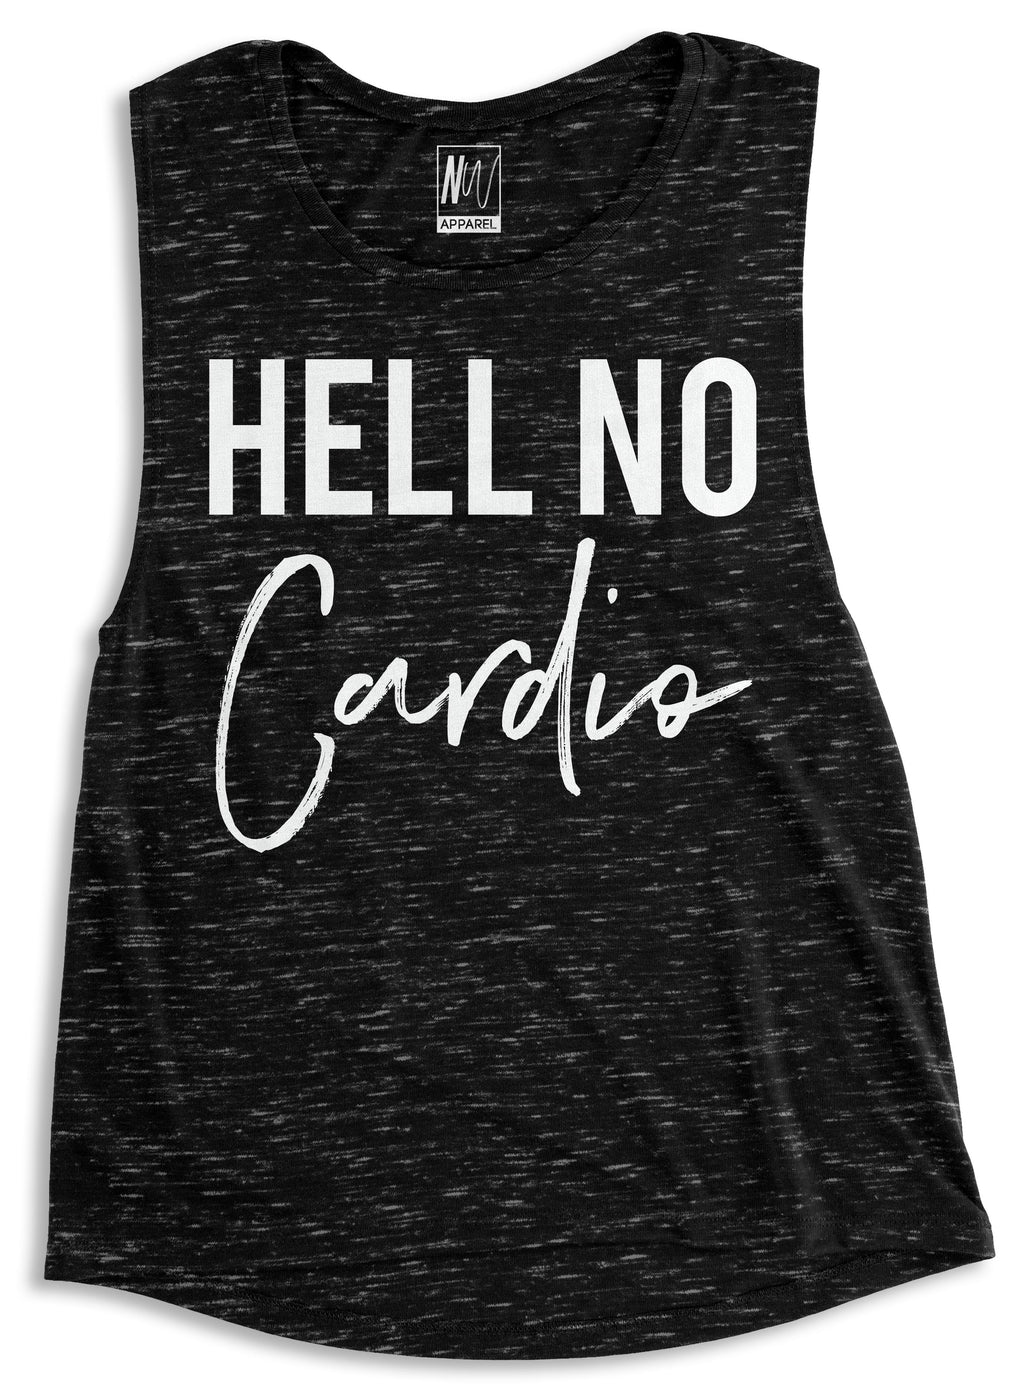 HELL NO Cardio Marble Muscle Tank Top - Pick Color